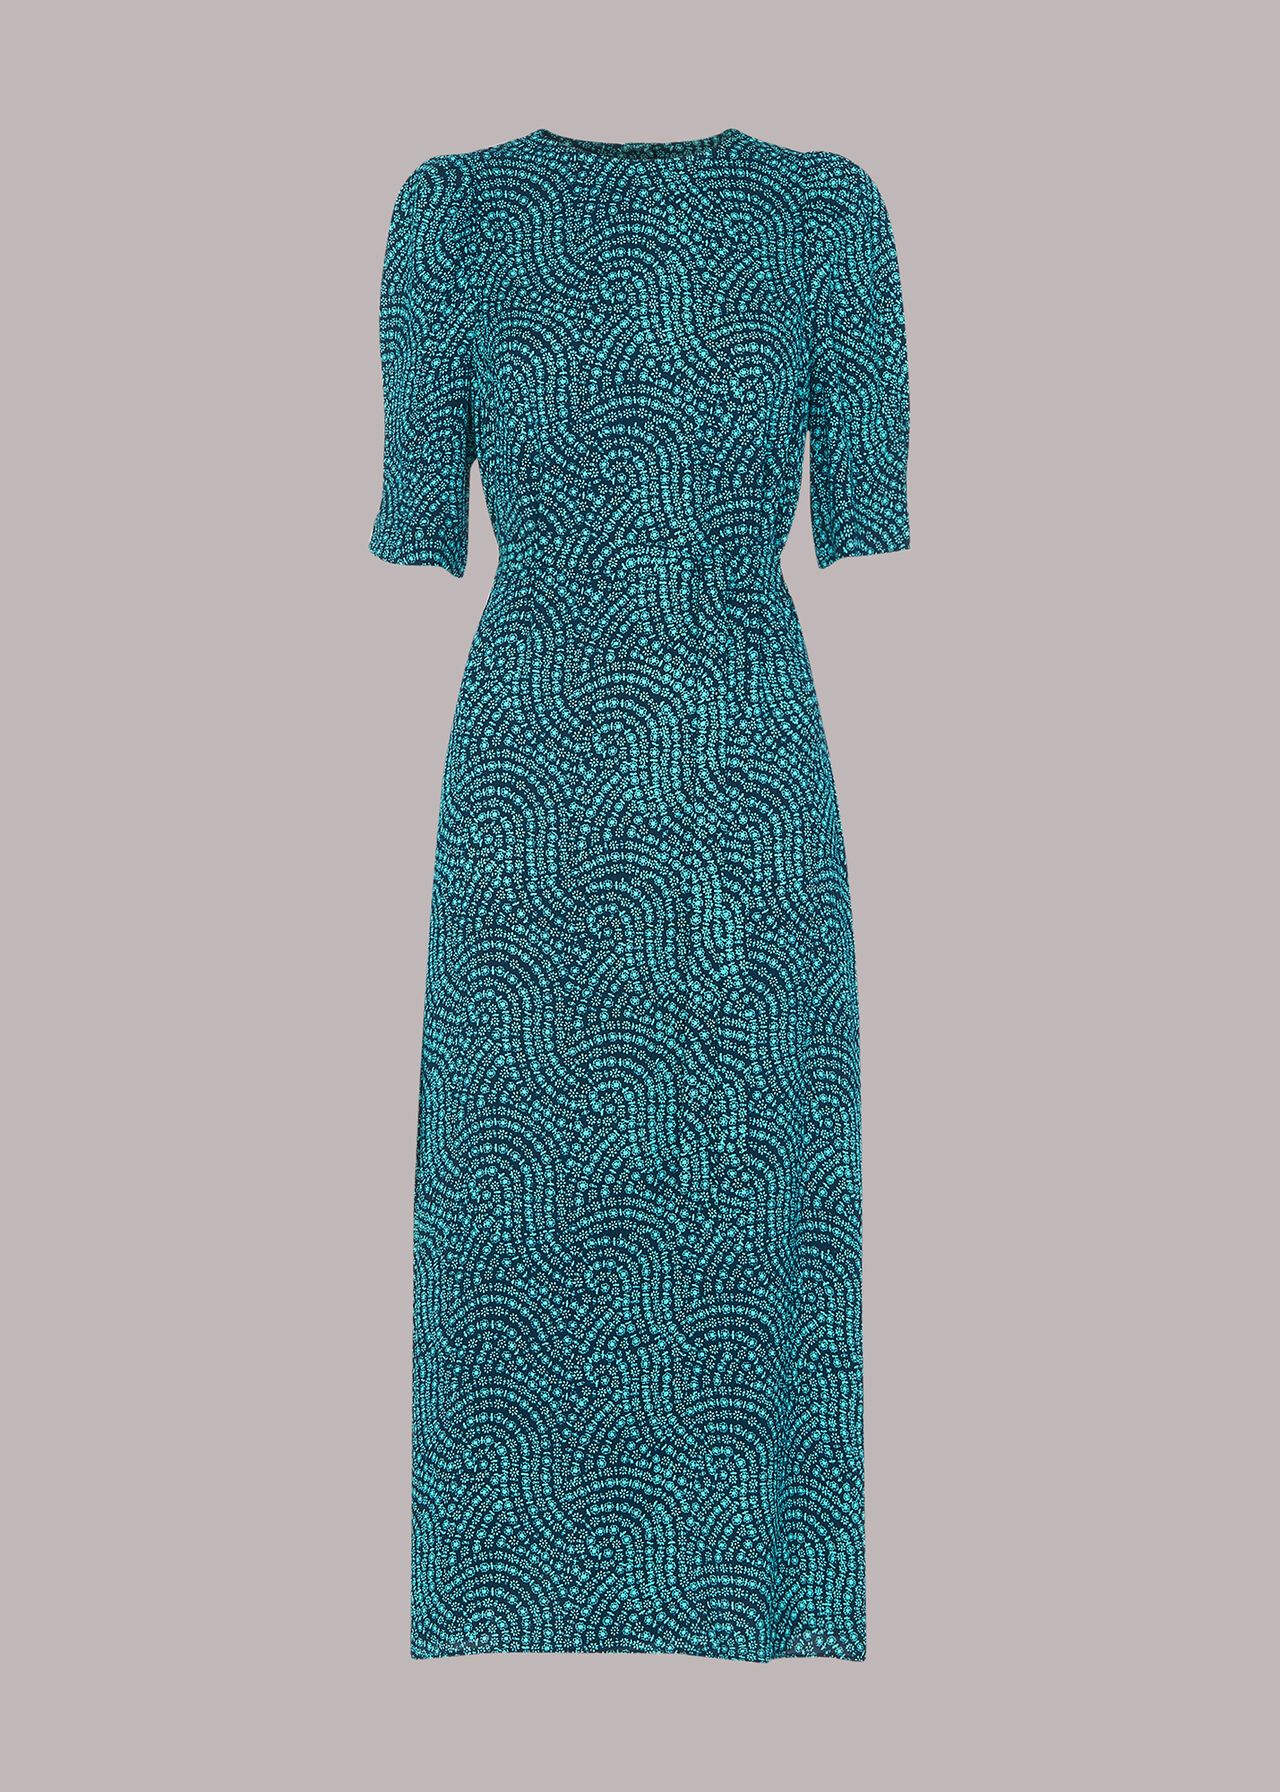 Blue/Multi Daisy Waves Cut Out Midi Dress | WHISTLES